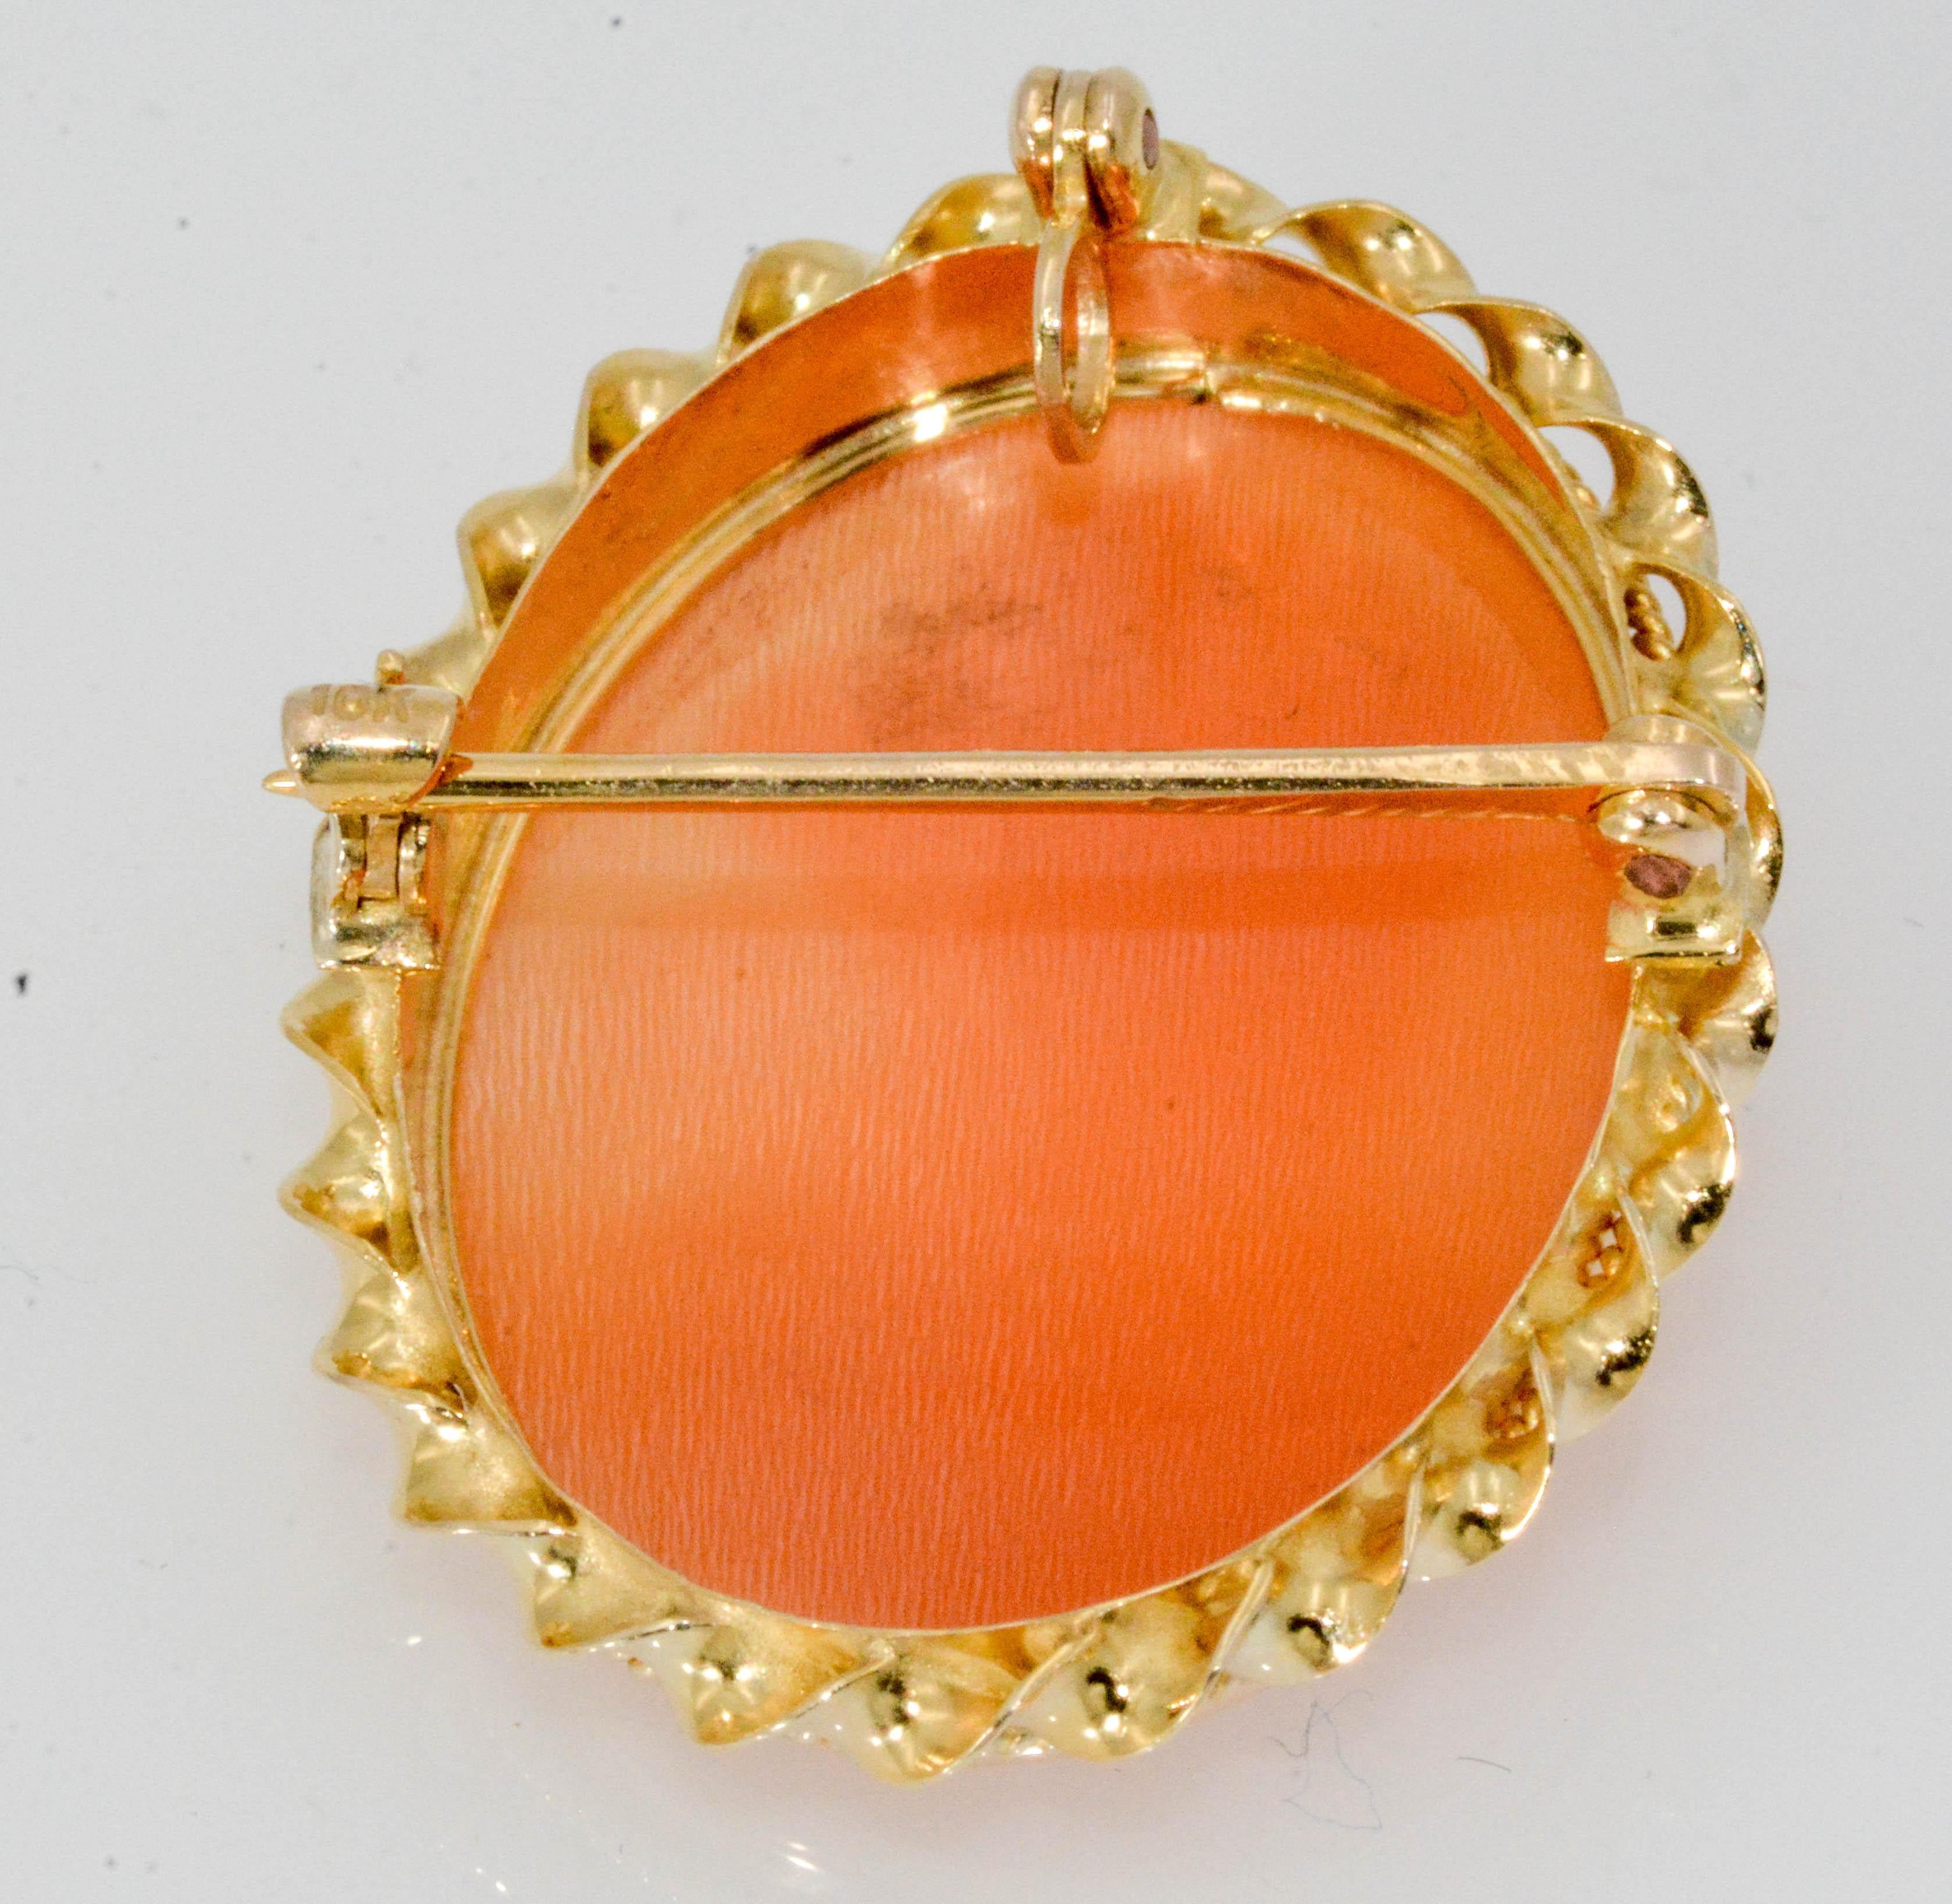 A delightful 1920's Victorian Cameo pendant brooch conversion. 10 karat yellow gold. 3/4 inch wide.